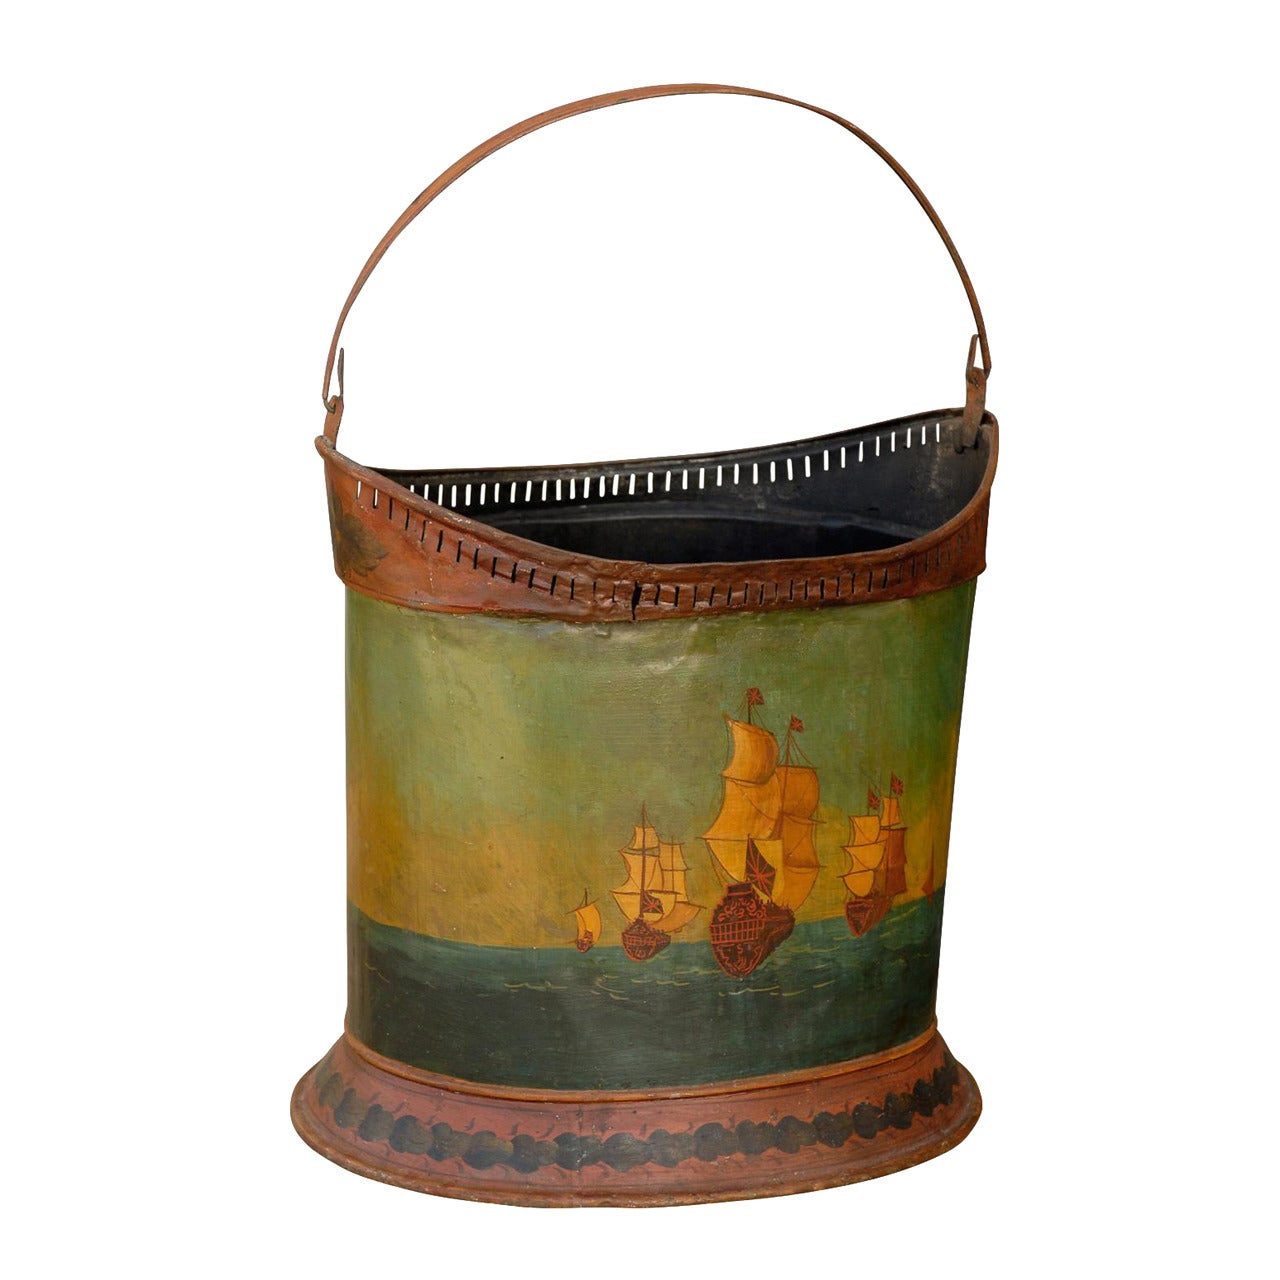 English Late 19th Century Painted Tole Bucket with Two-Masted Ships Depiction